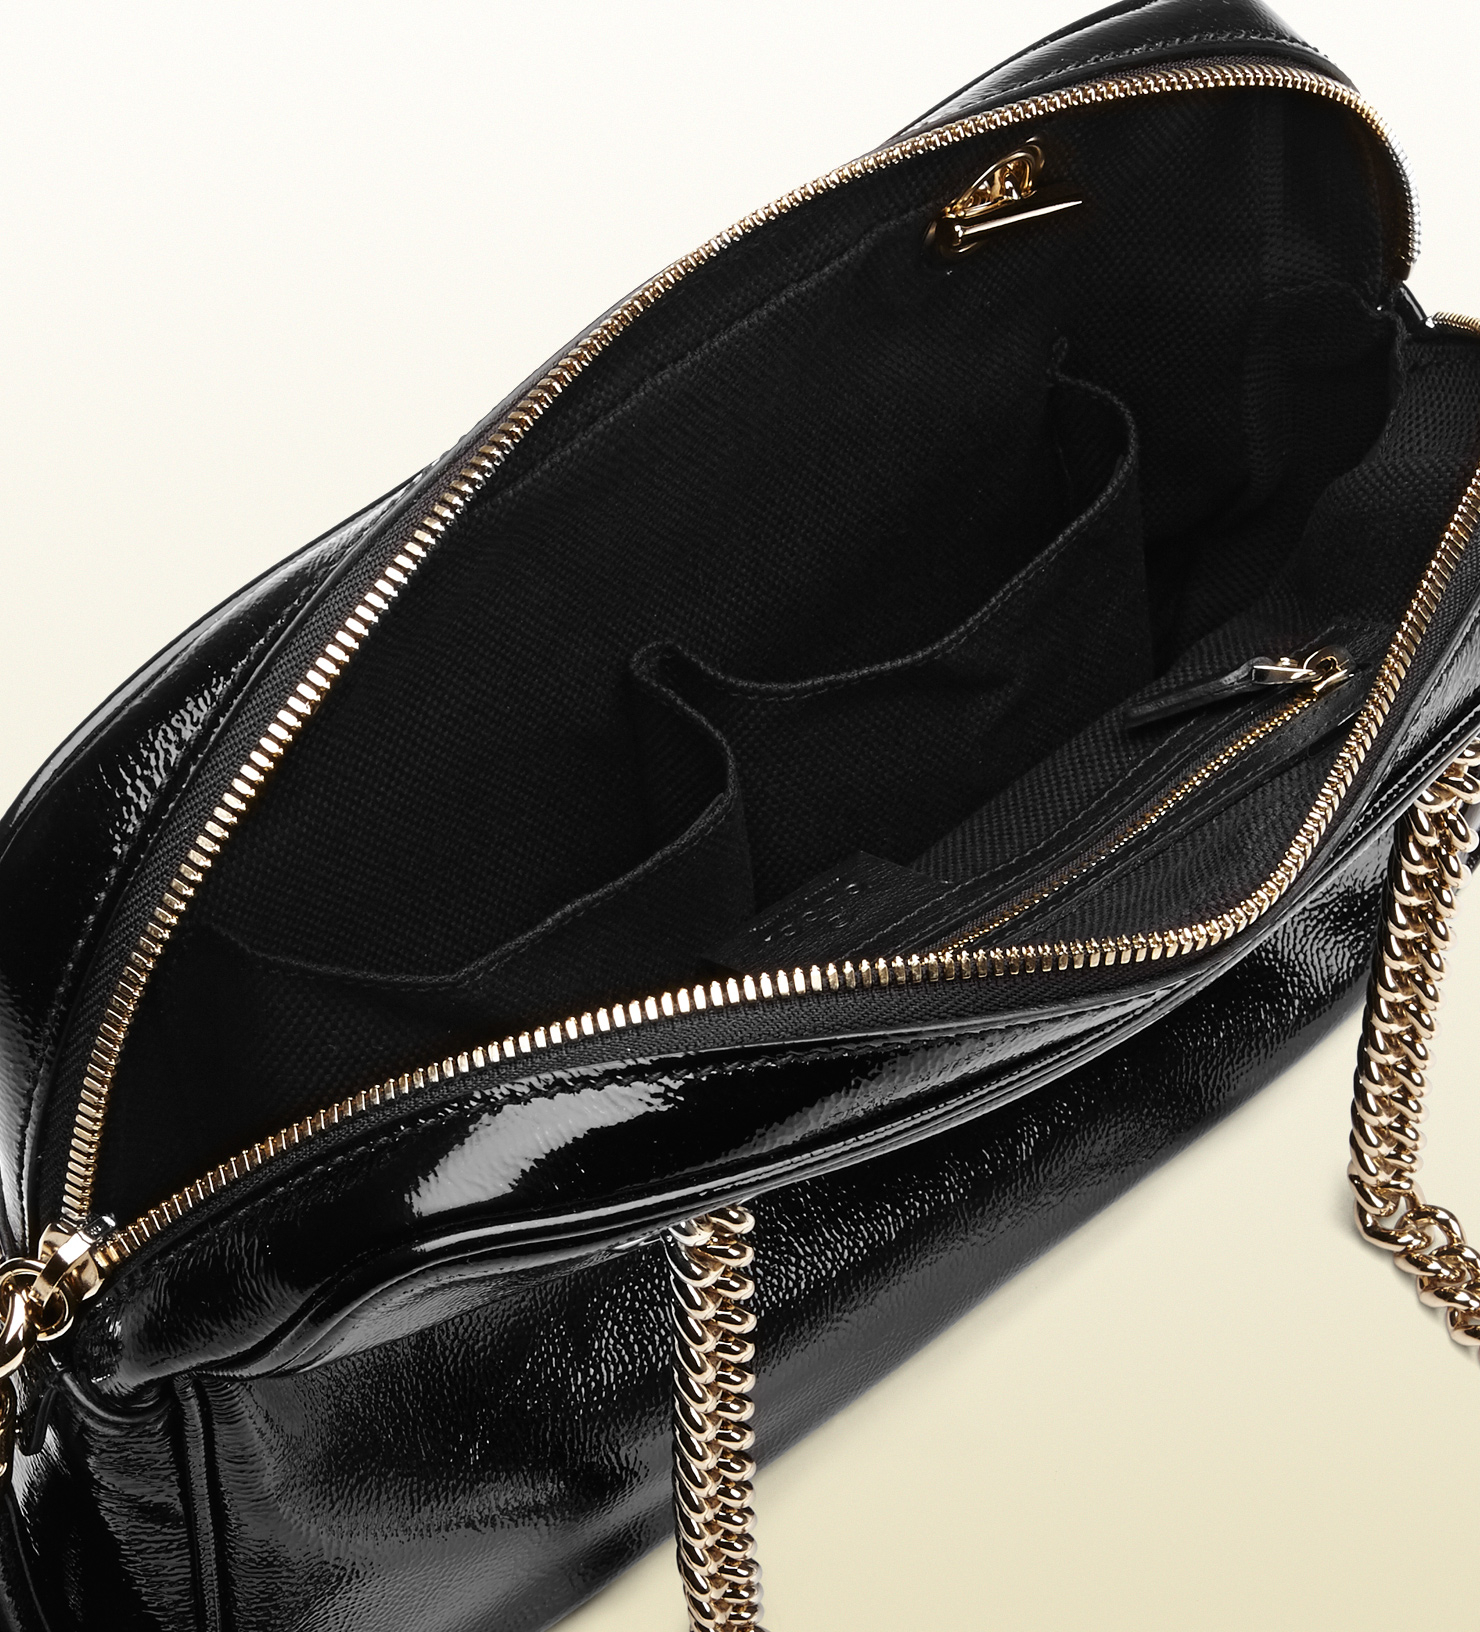 Gucci Soho Soft Patent Leather Chain Shoulder Bag in Black - Lyst